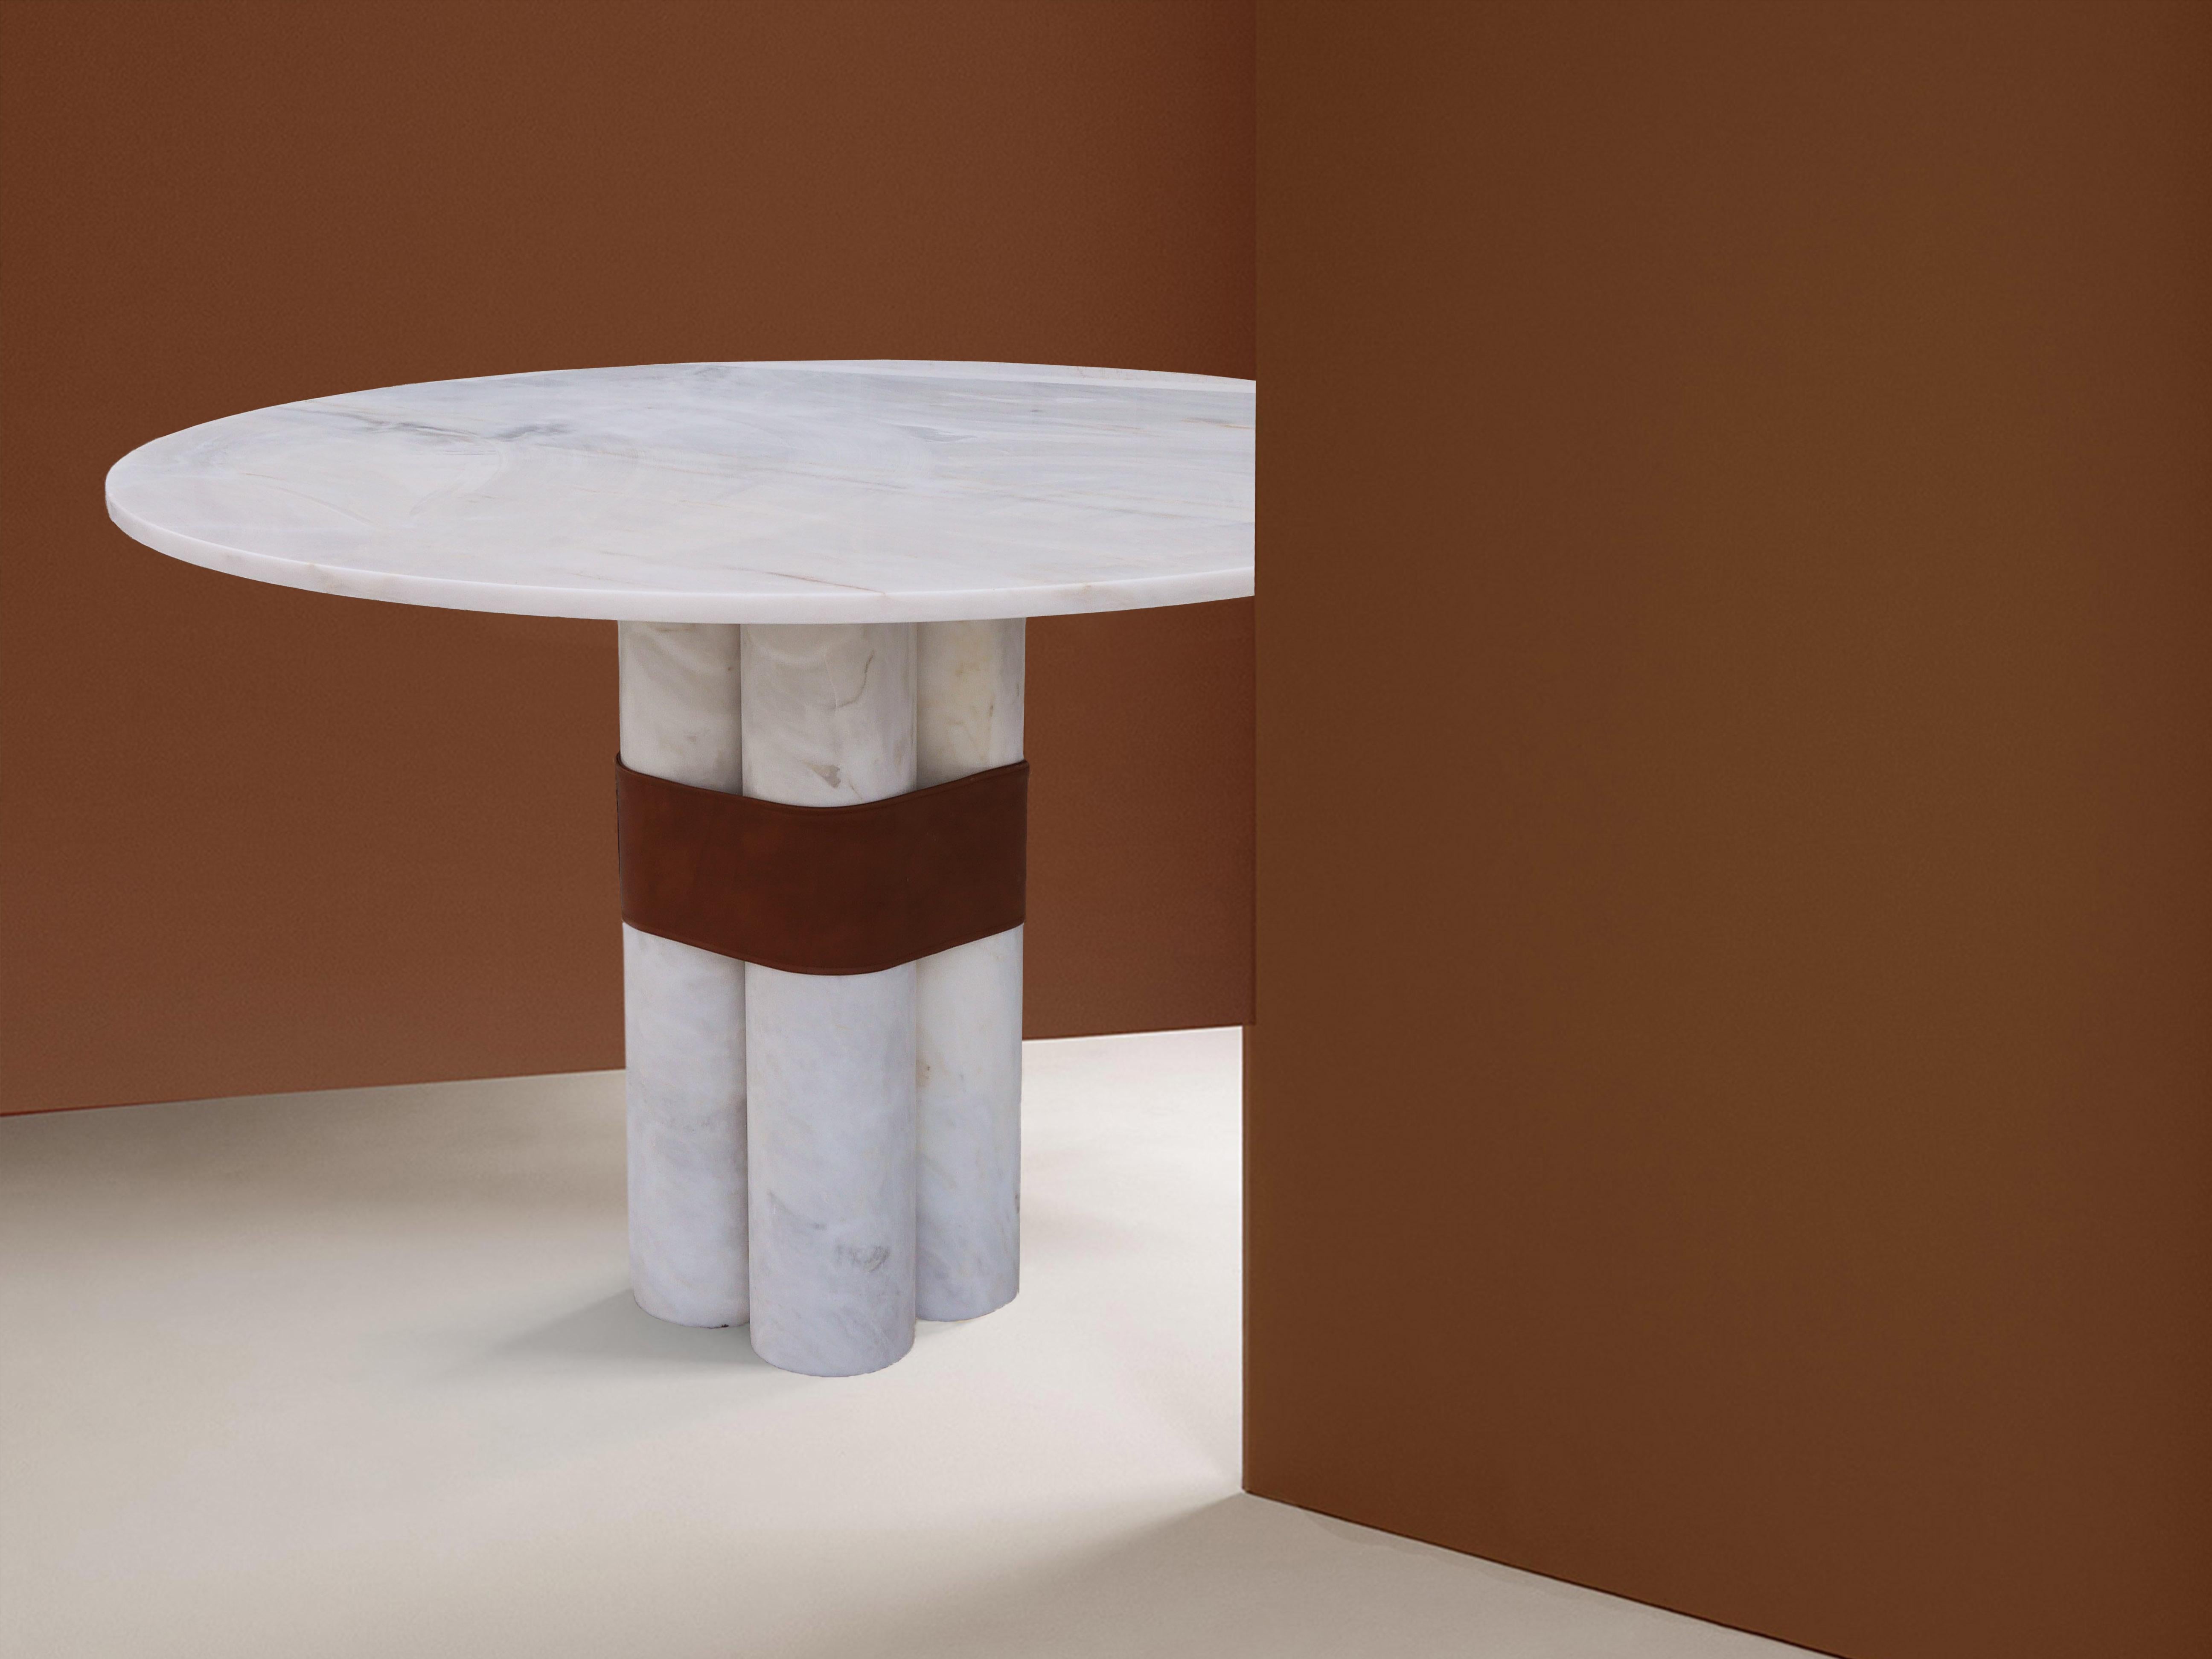 AXIS Round Table 
Its base formed by a single thin block resembling round columns and its round top create an almost architectural balance. It also has a final and unexpected touch thanks to the handmade eco leather belt that embrace the structure.